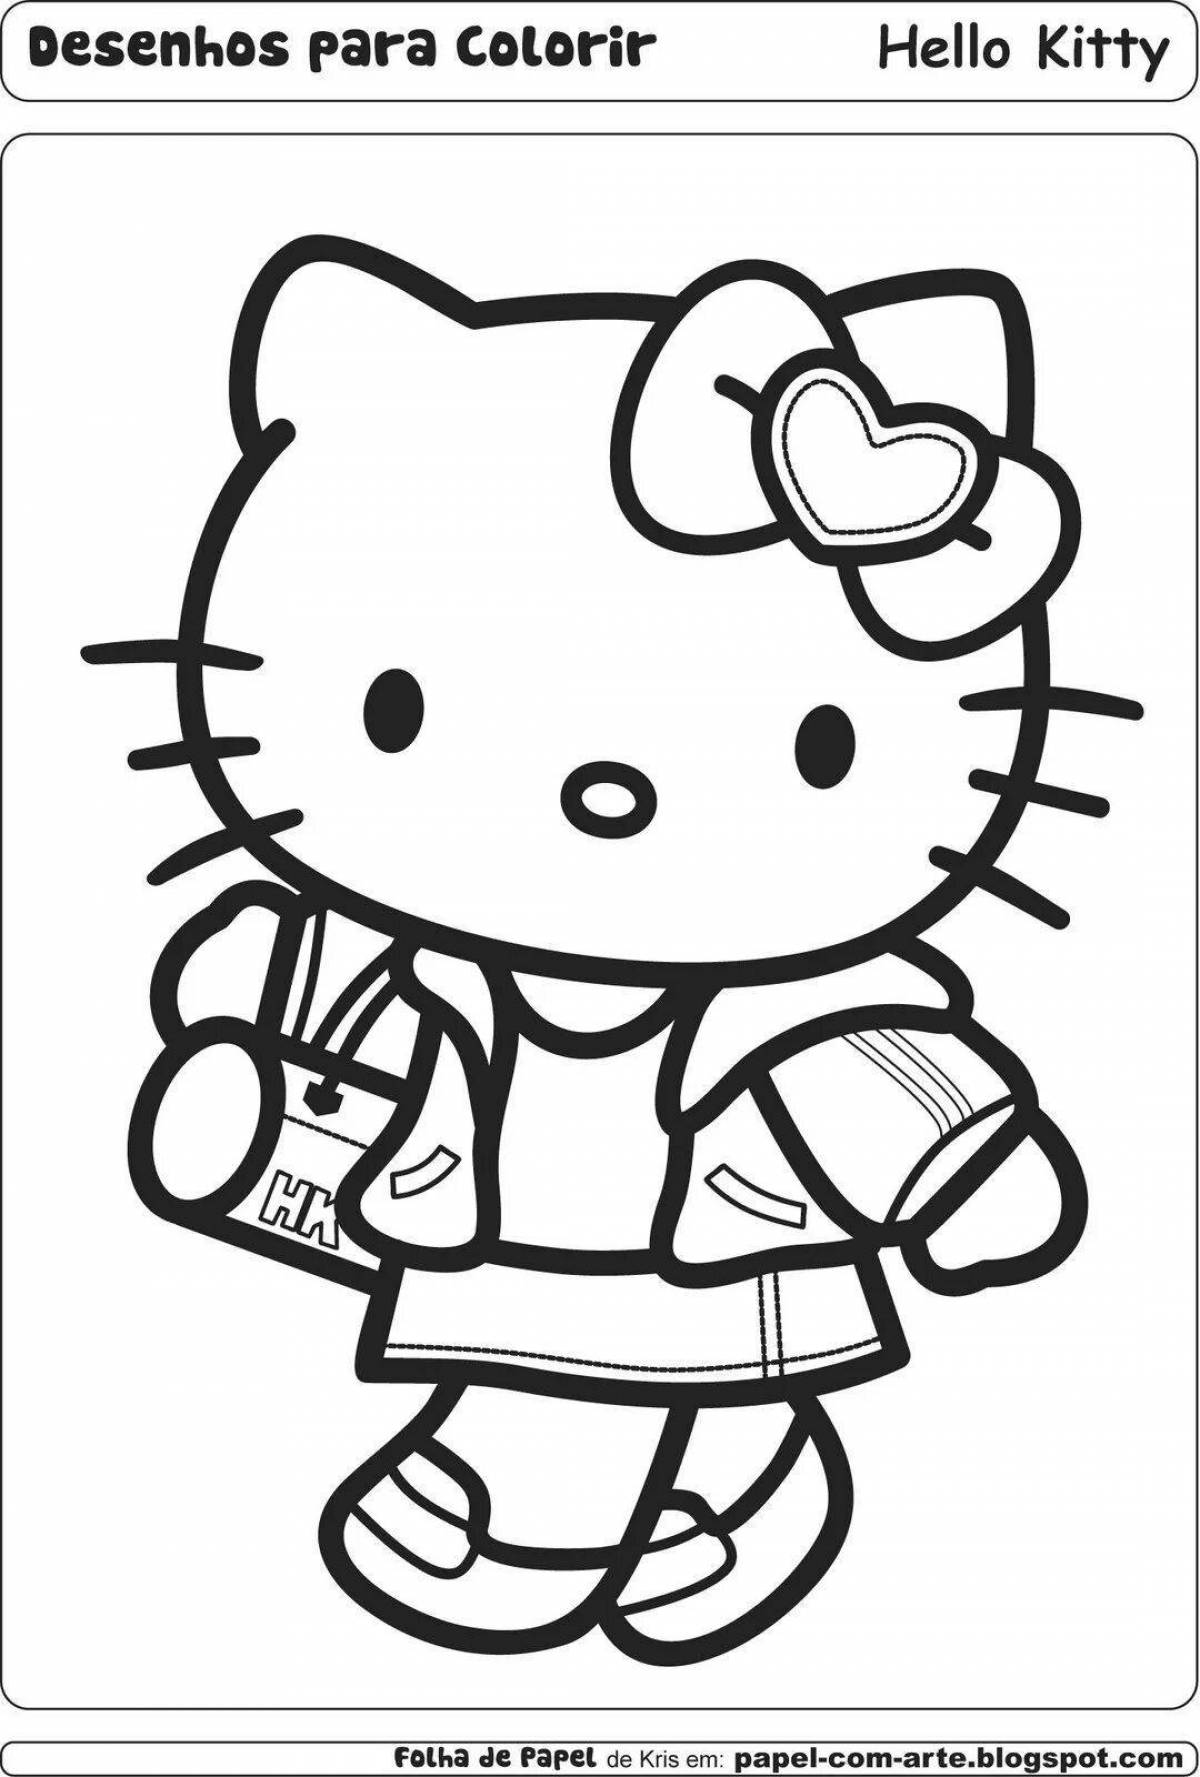 Live tune and hello kitty coloring page